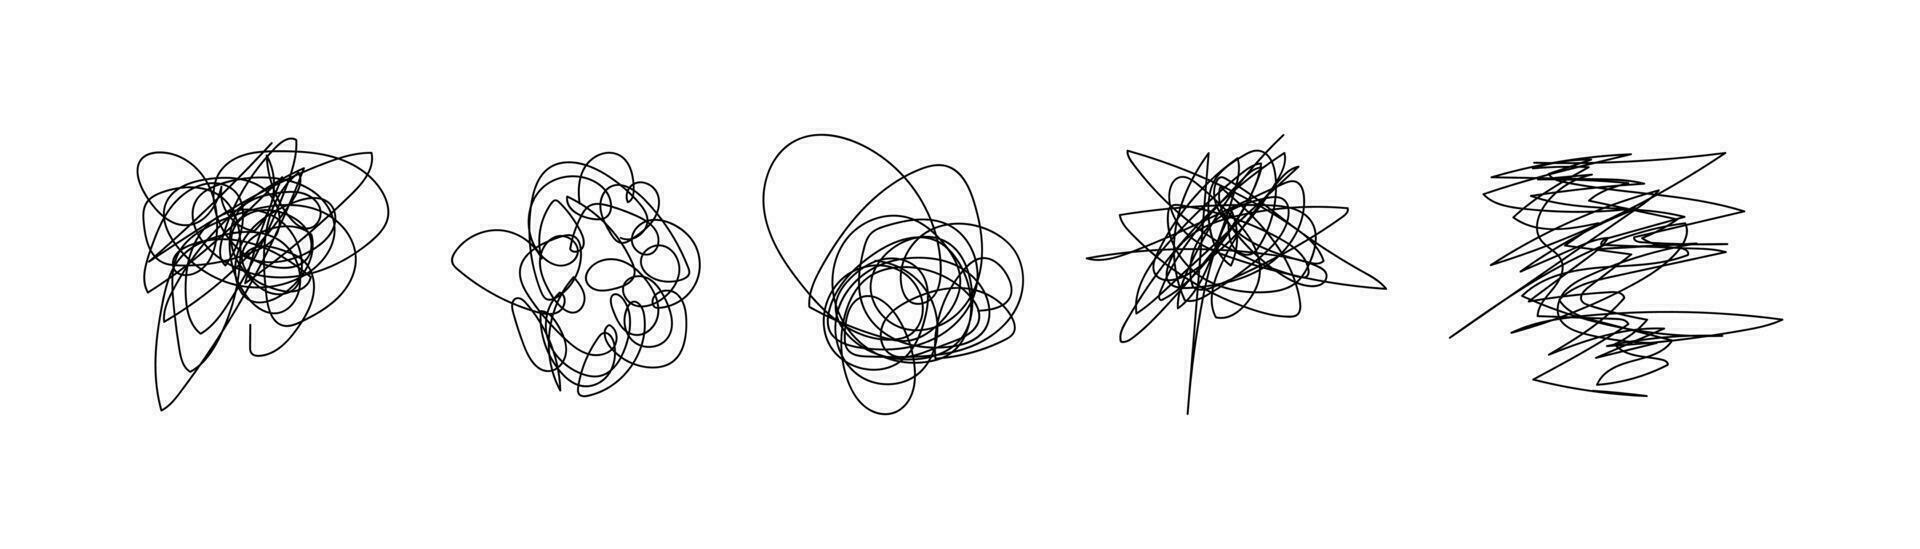 Hand drawn doodle set with abstract tangled scribbles. Vector illustration design.